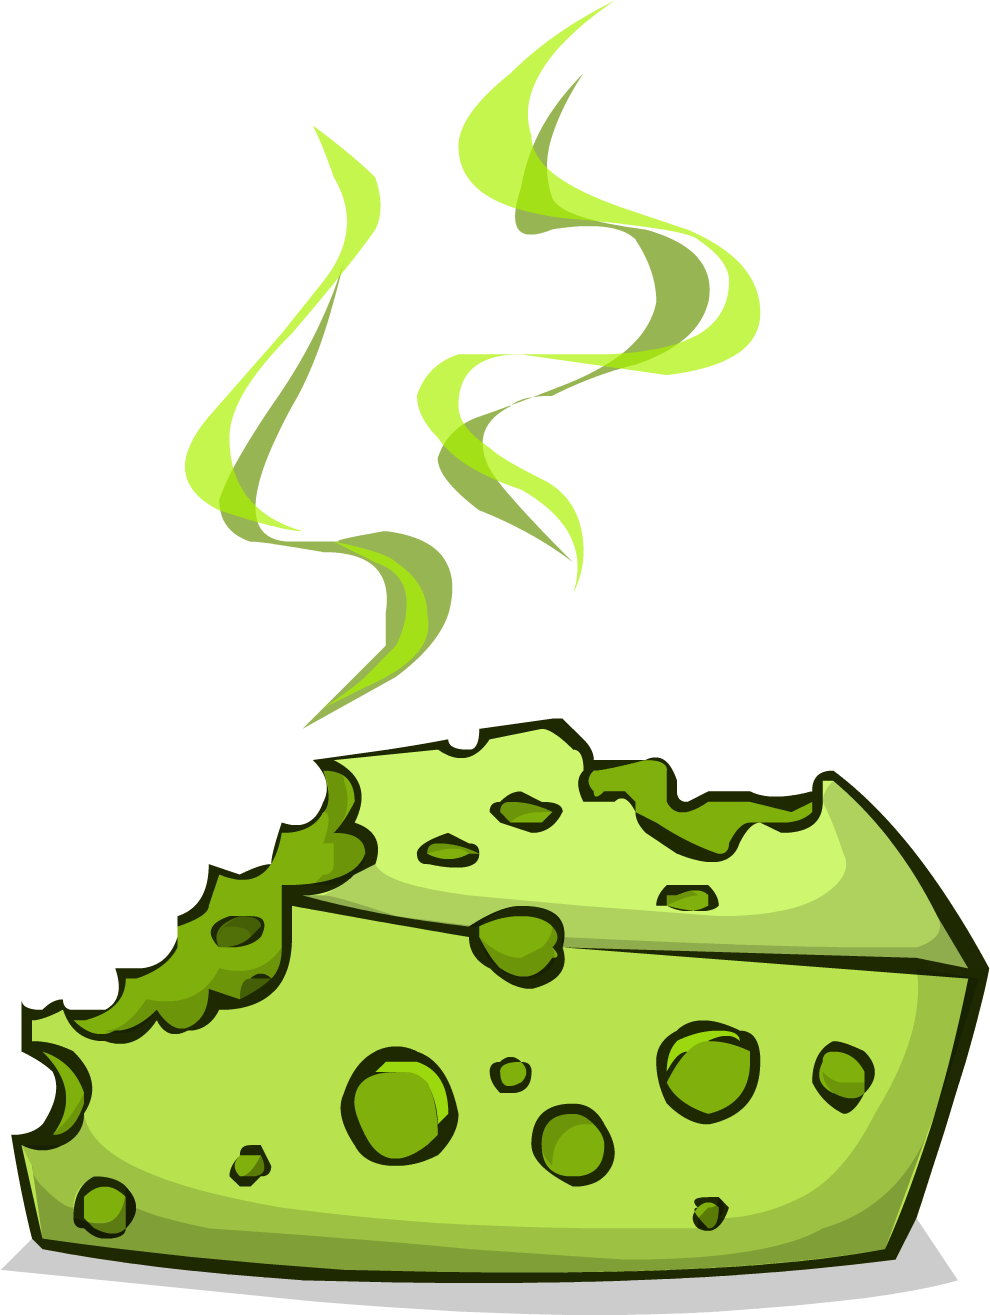 Nose clipart odor. Image stinky cheese c